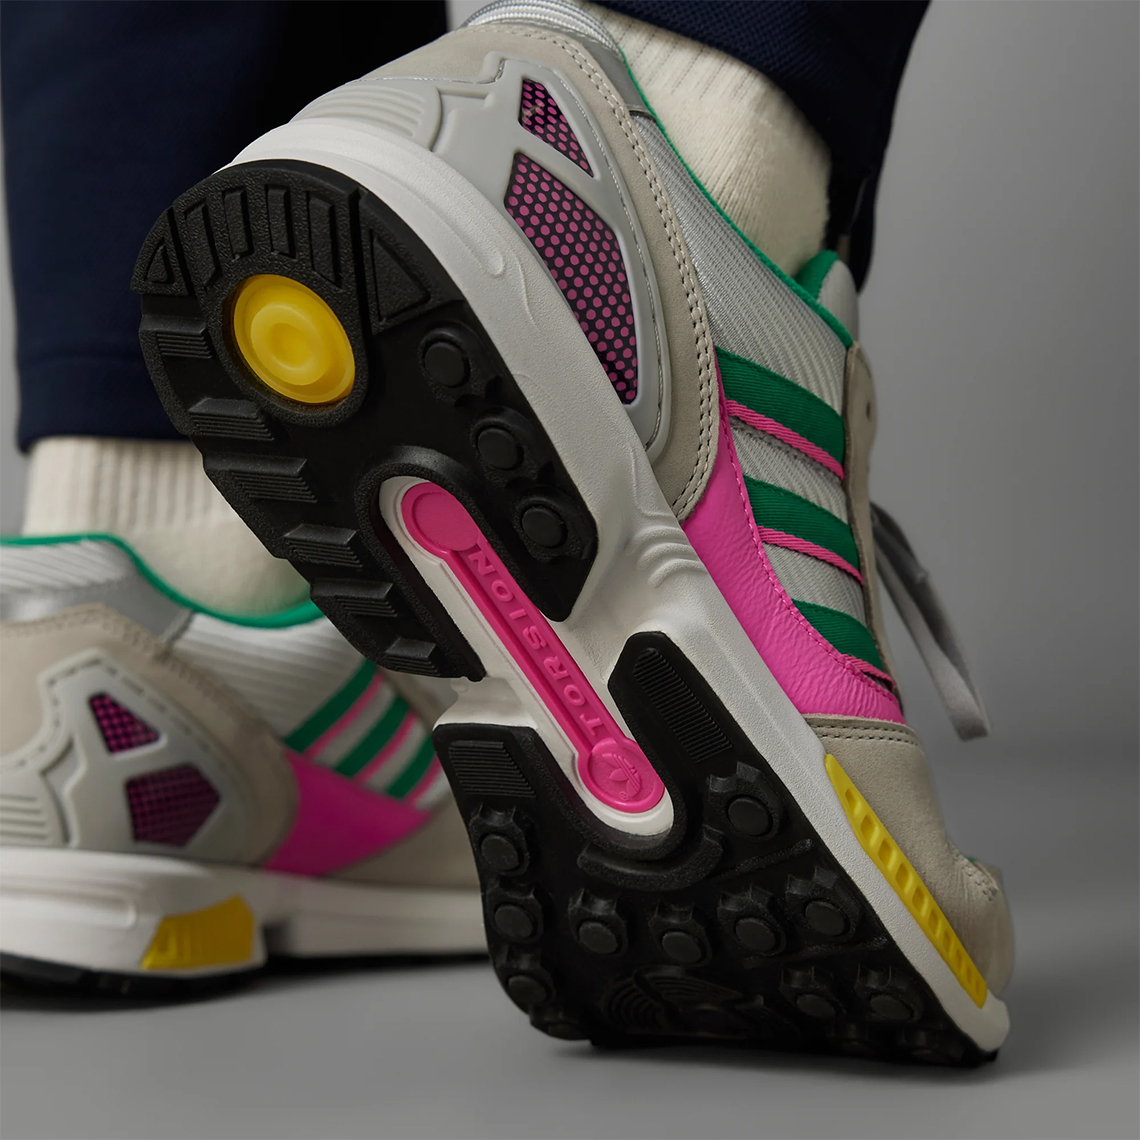 adidas zx8000 grey two court green screaming pink IG3076 1